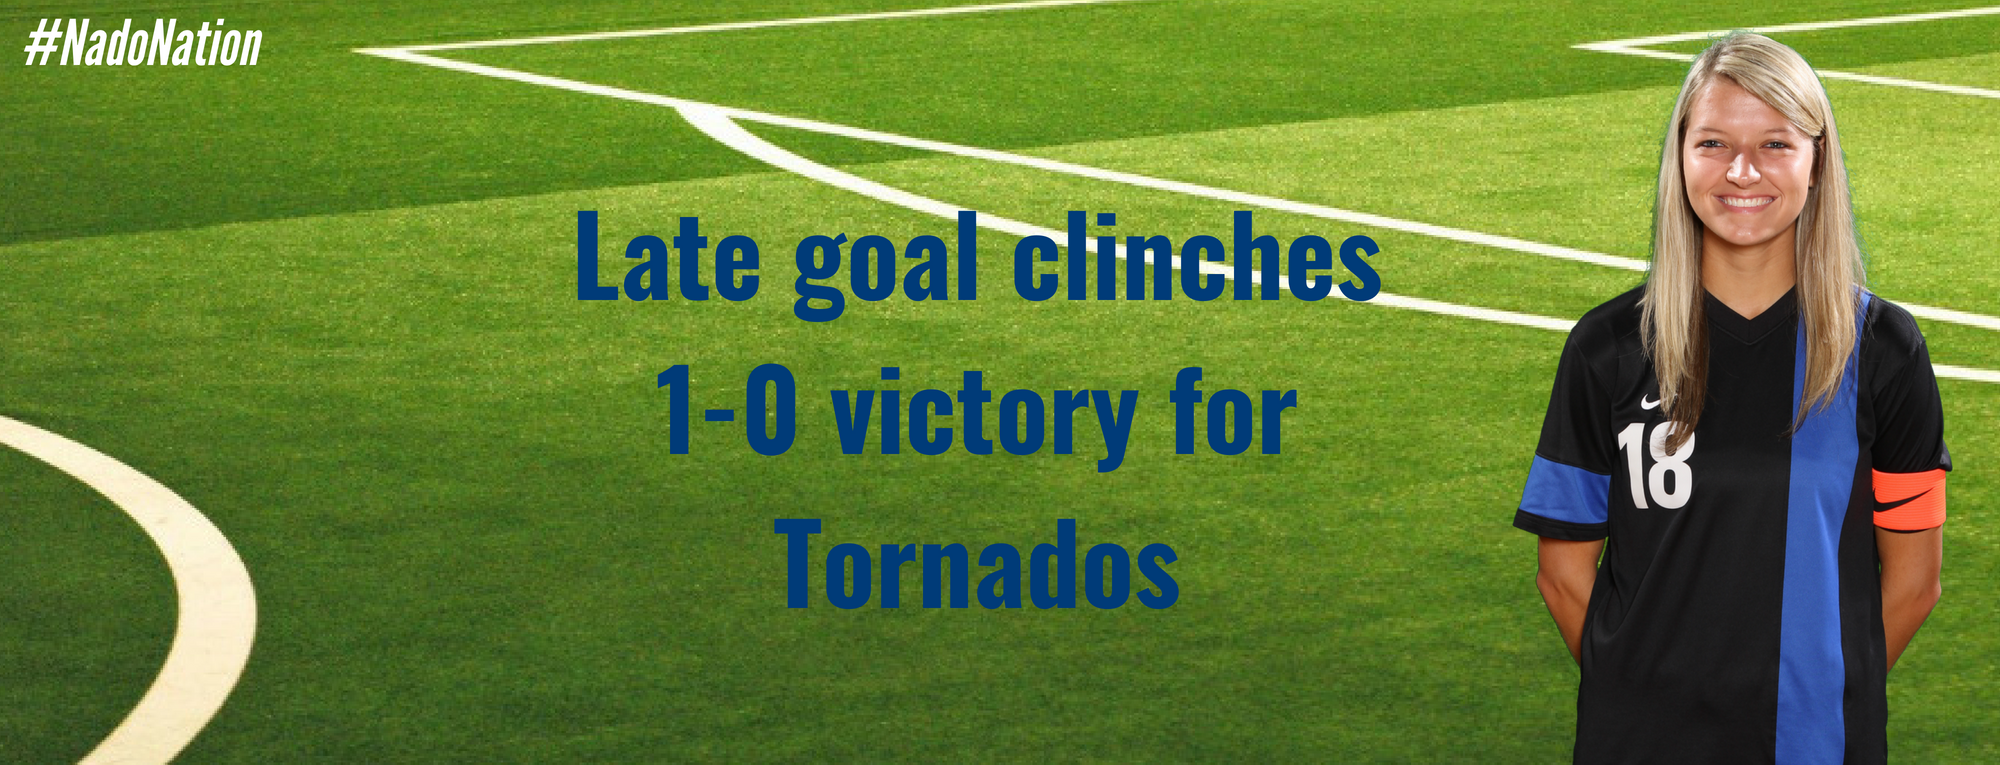 Ashley Hughes’ late goal pushes Tornados past Wasps in season opener